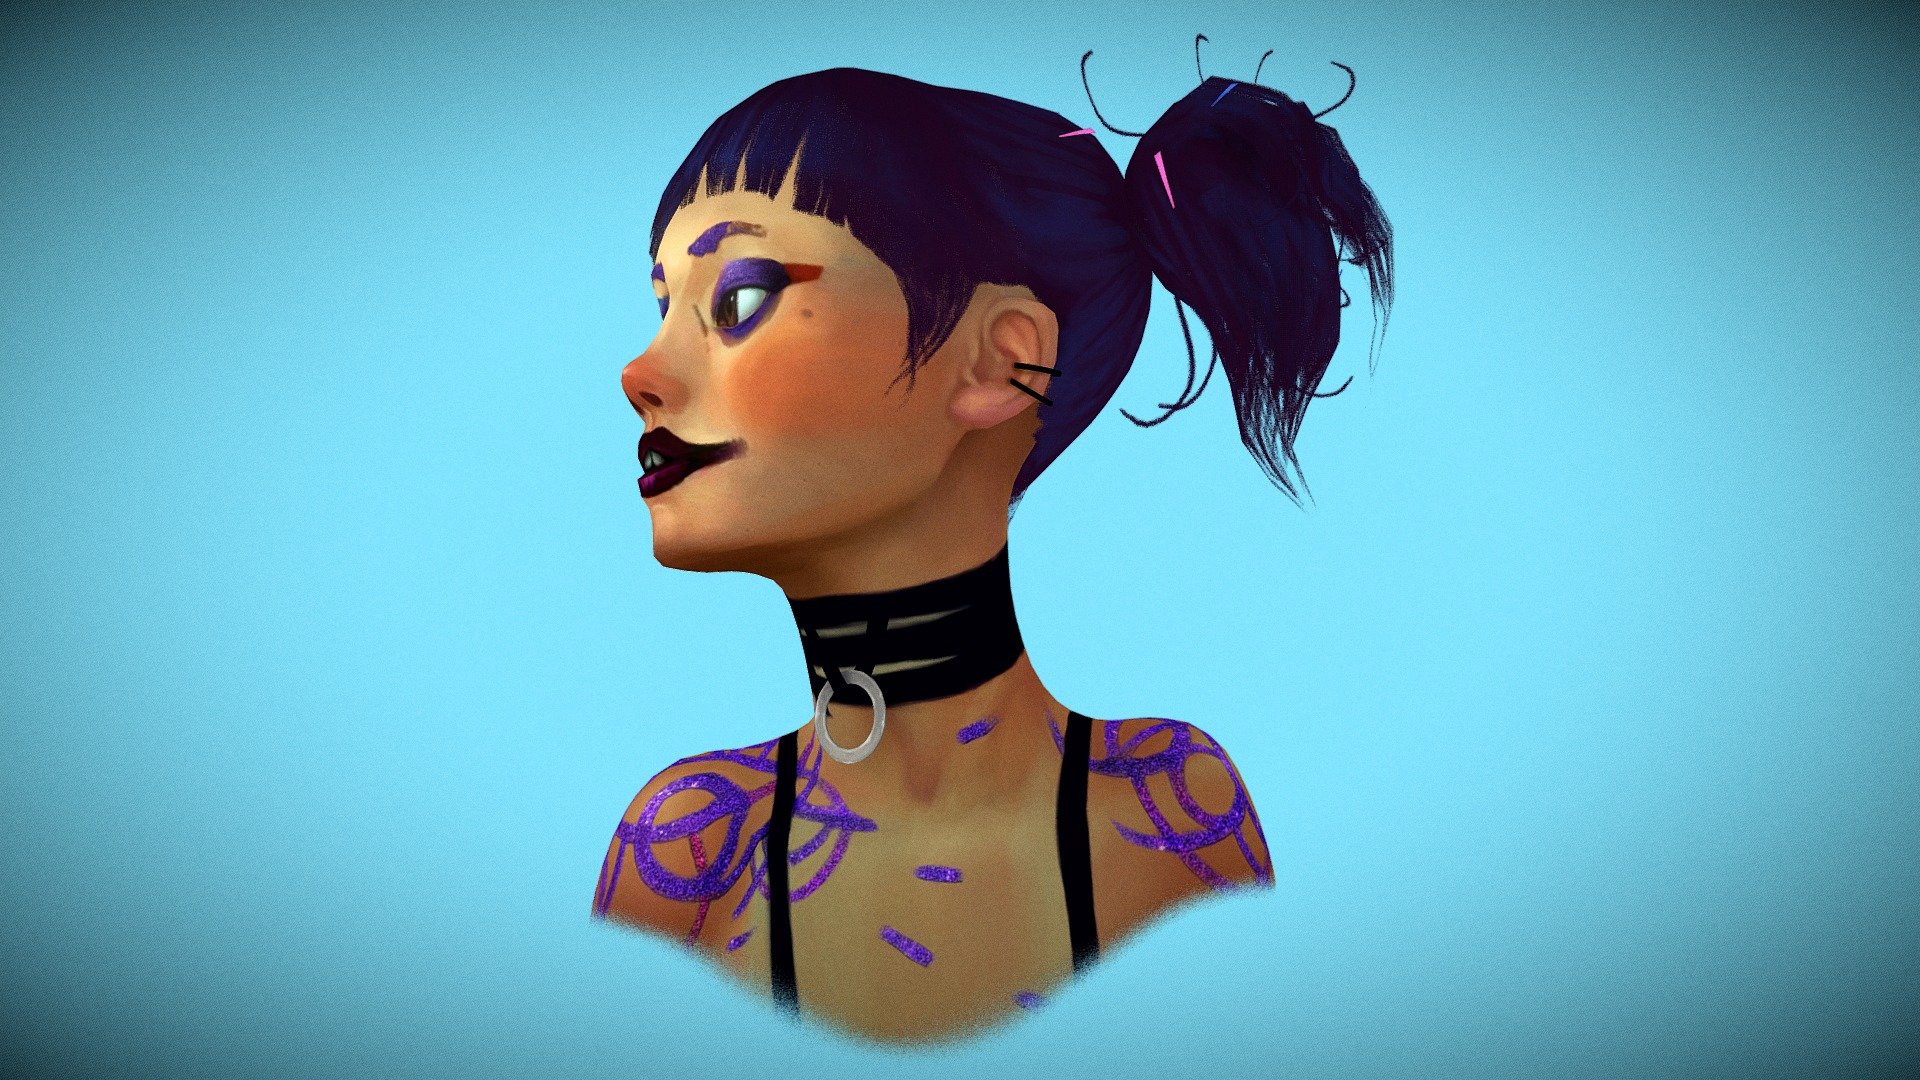 A 3D model handpainted I made based on this character from the excellent animated short film created by Alberto Mielgo and Tim Miller - Girl from "The Witness" (Love, Death & Robots) - 3D model by luisservin89 3d model